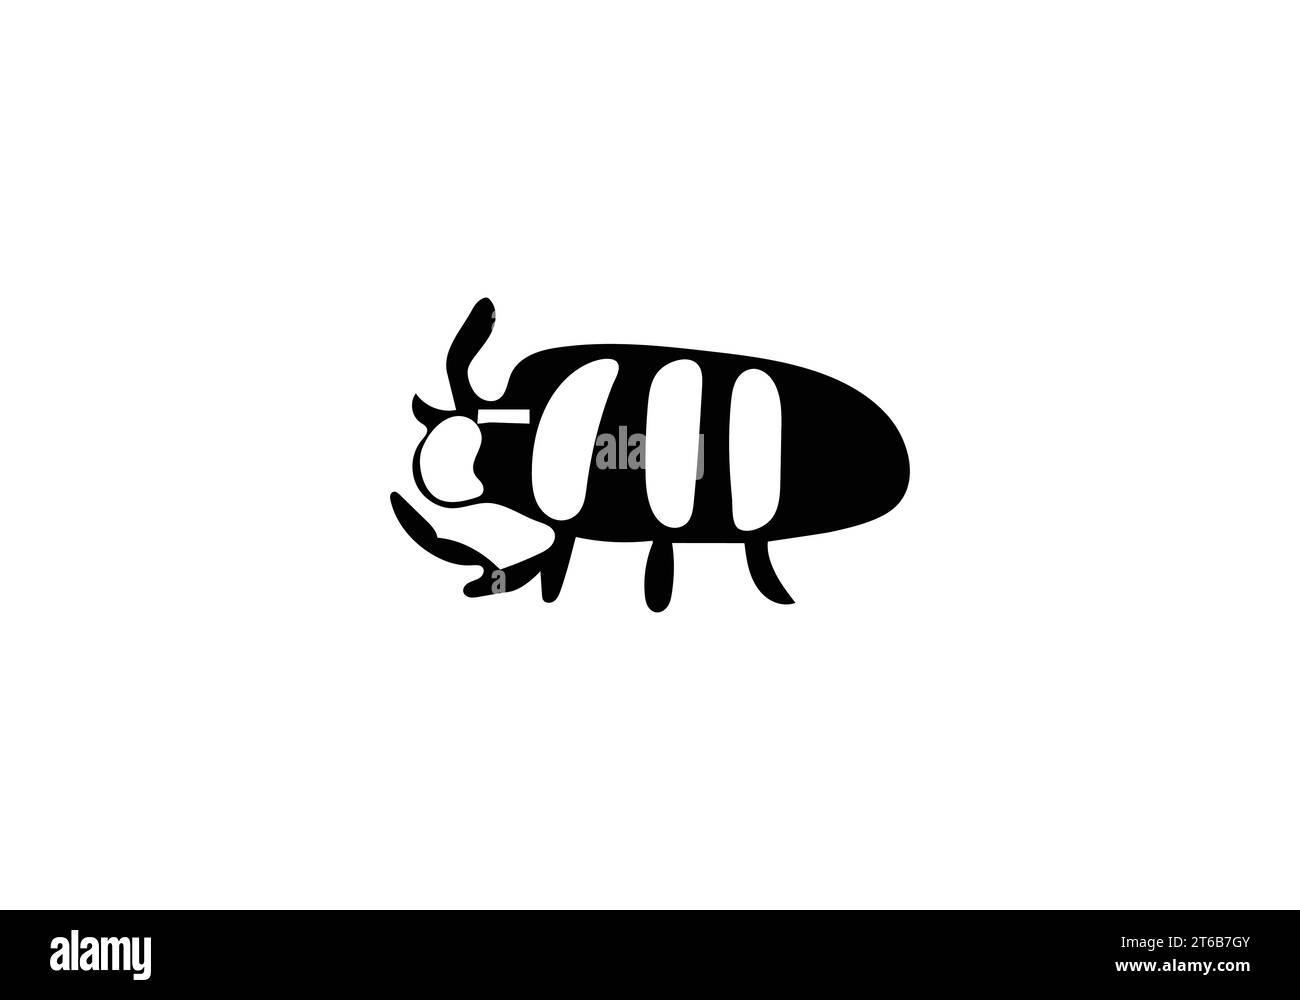 Biscuit Beetle minimal style  icon illustration design Stock Vector